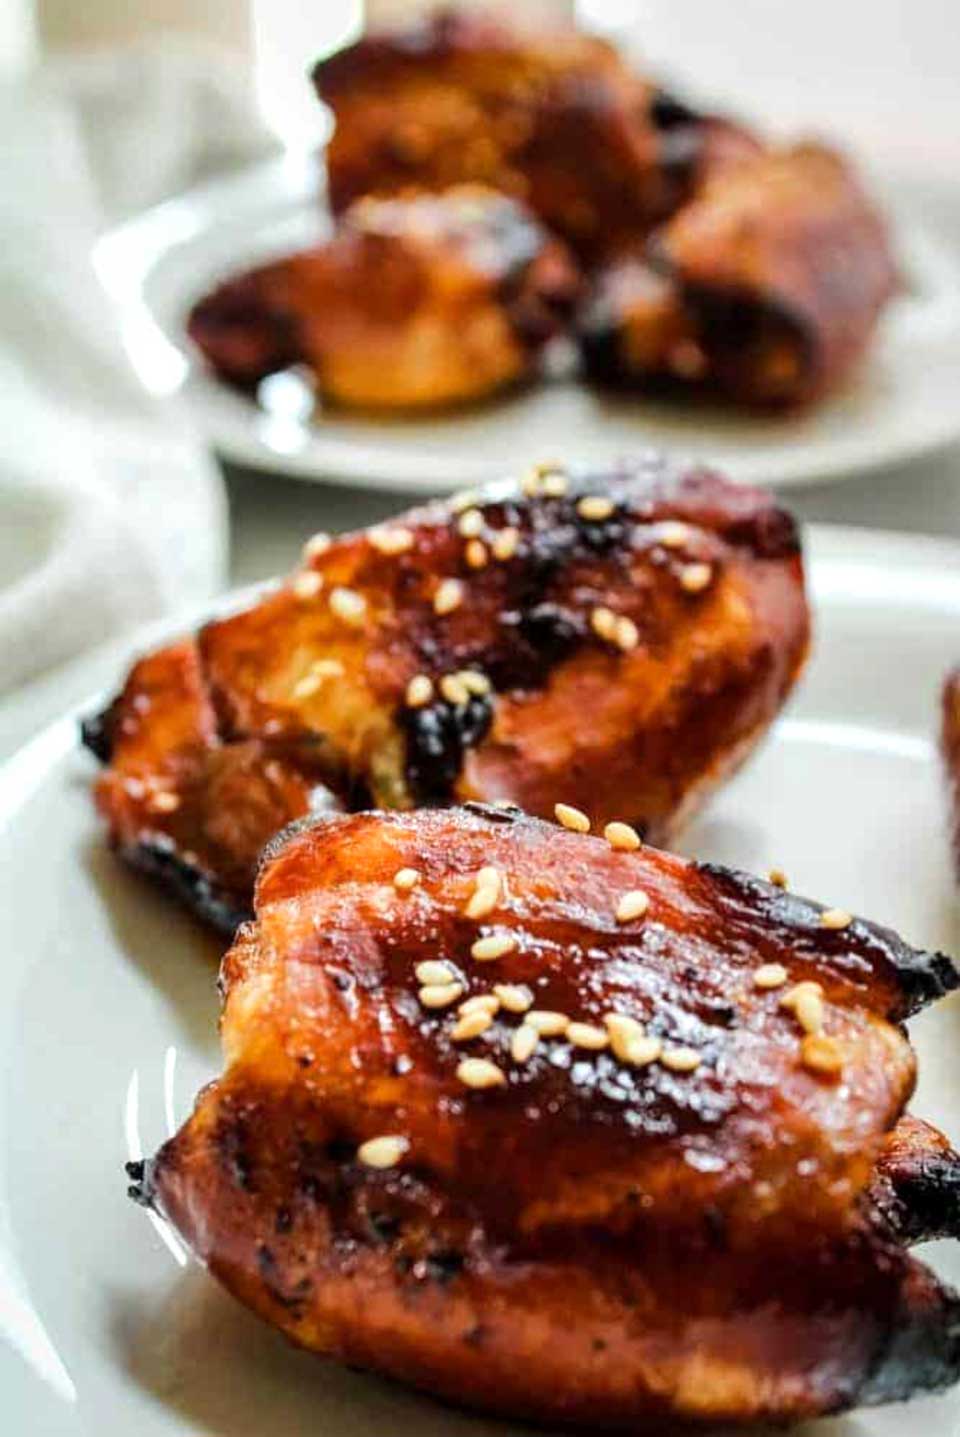 Thighs with Honey Soy Marinade, presented on white plates.